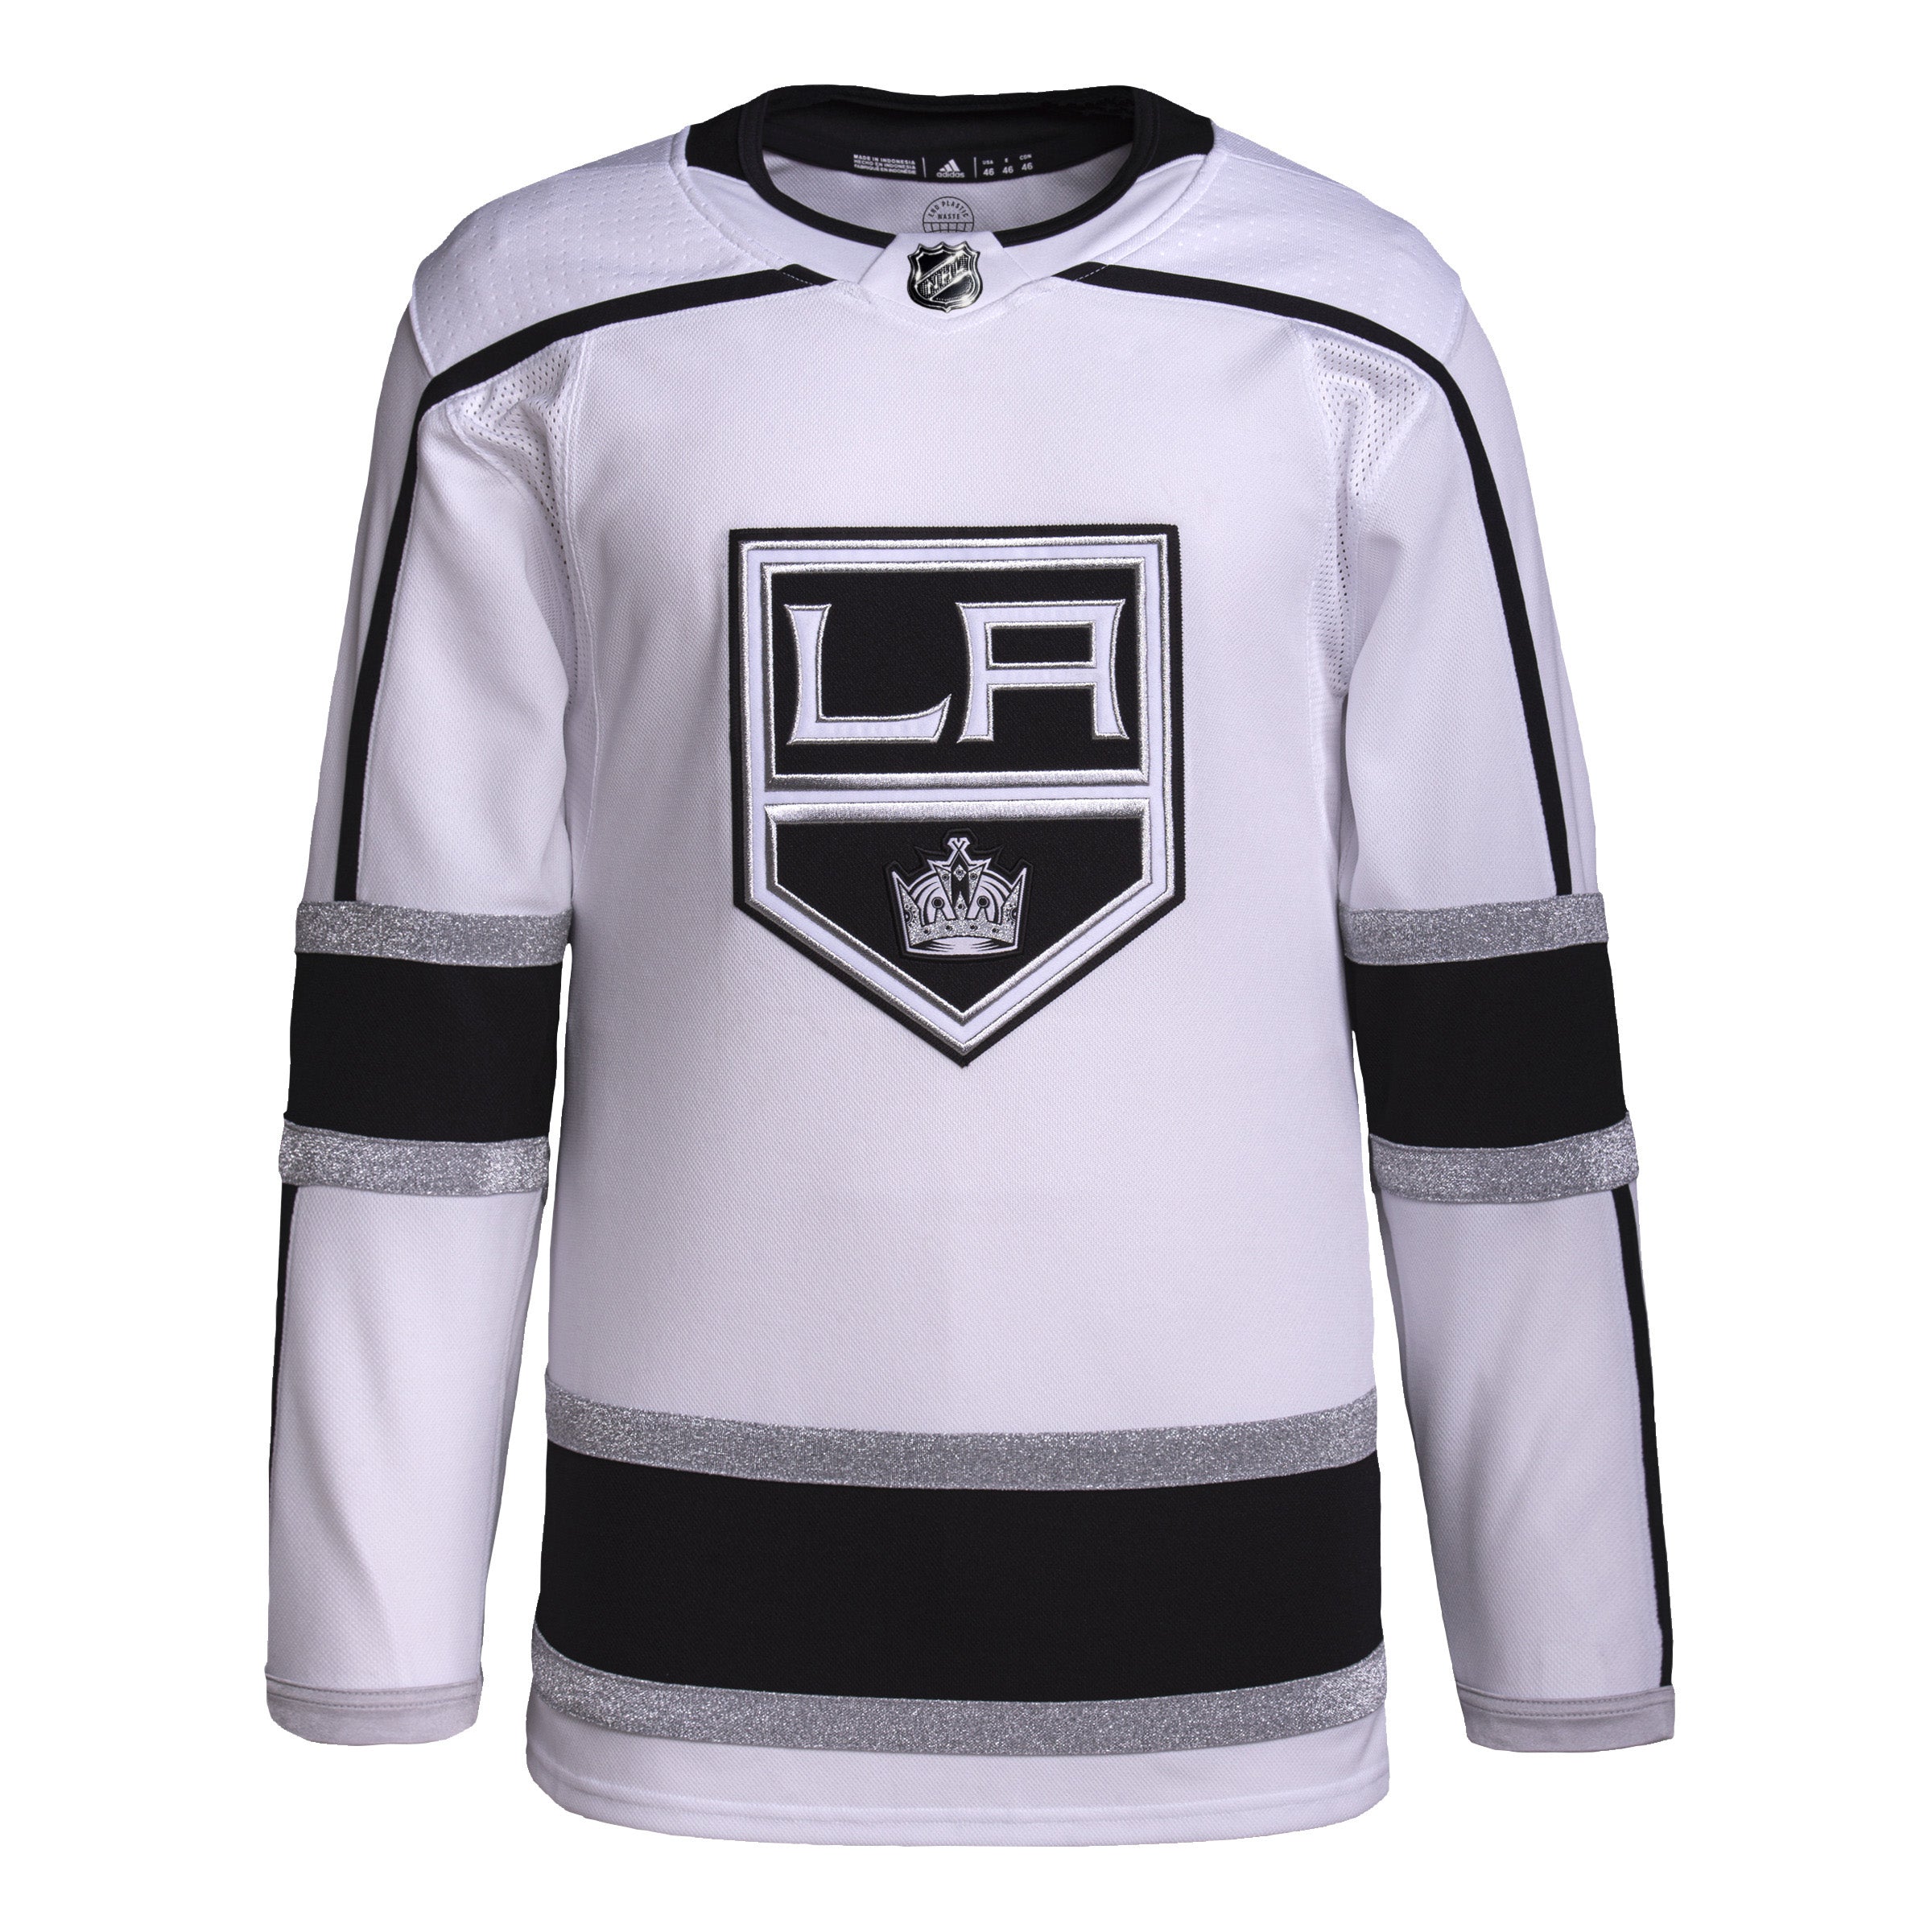 Bell Quinton home jersey